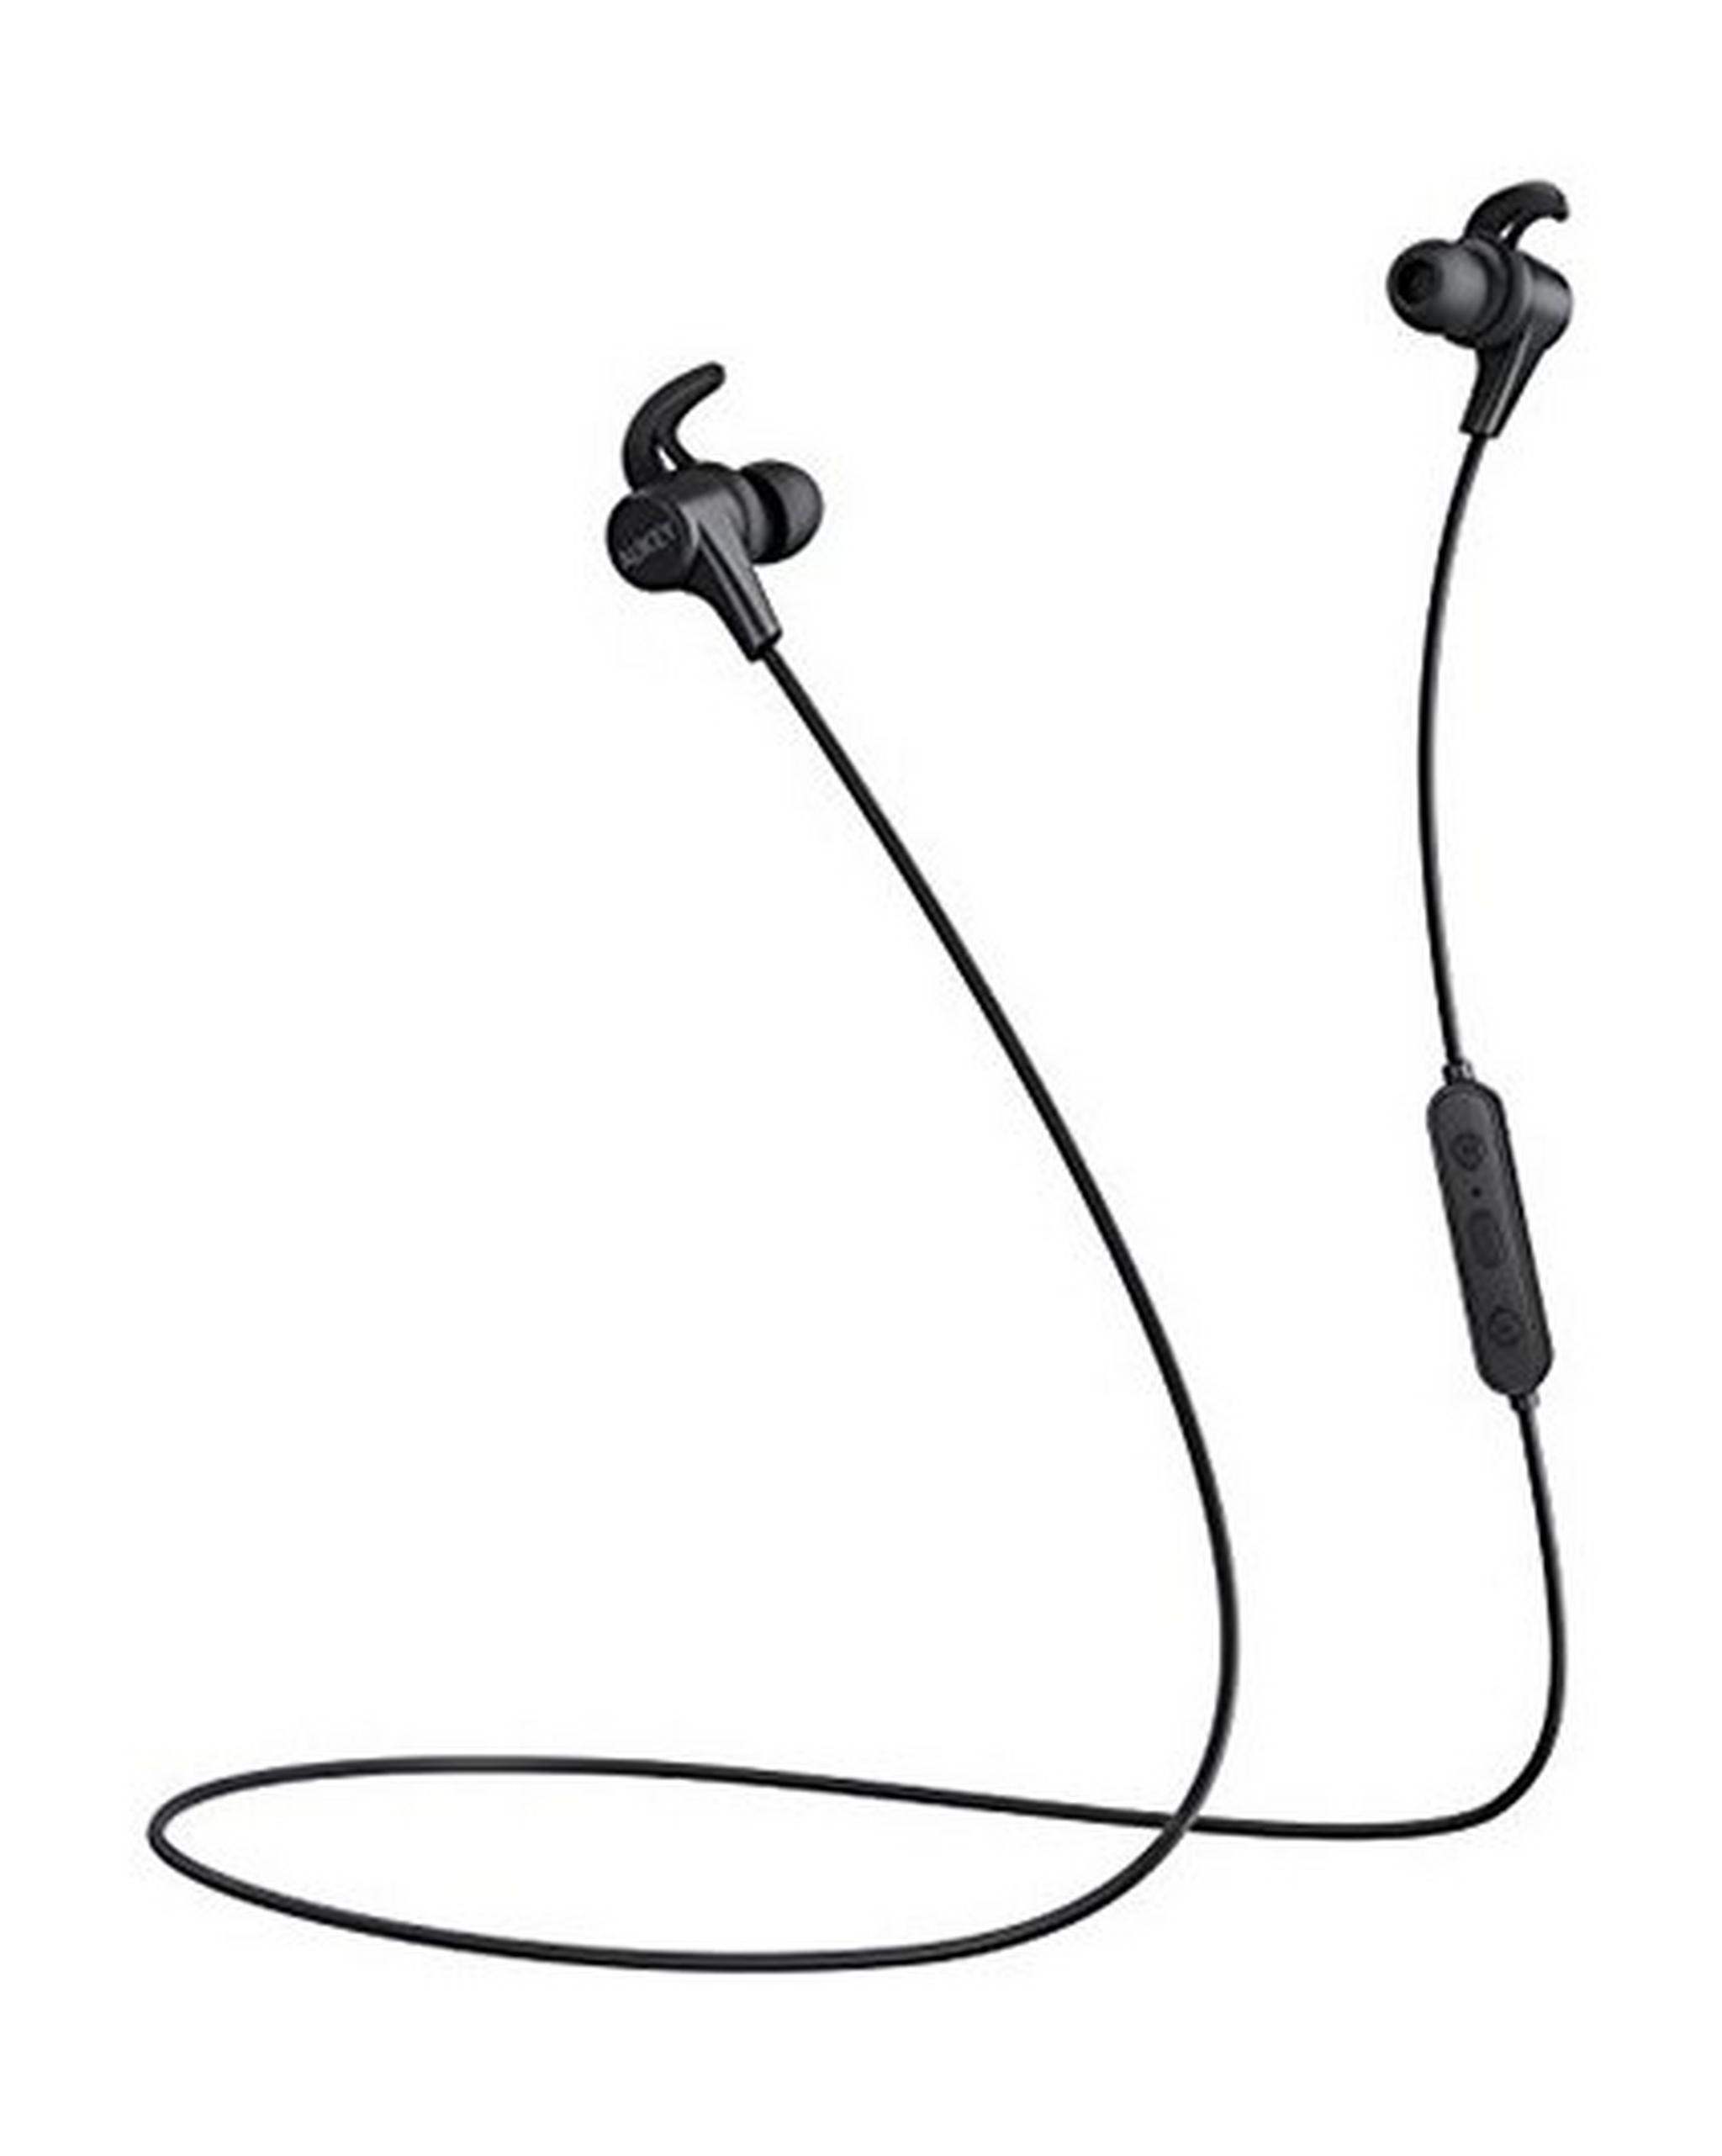 Aukey EPB62 Magnetic Wireless Earbuds - Black